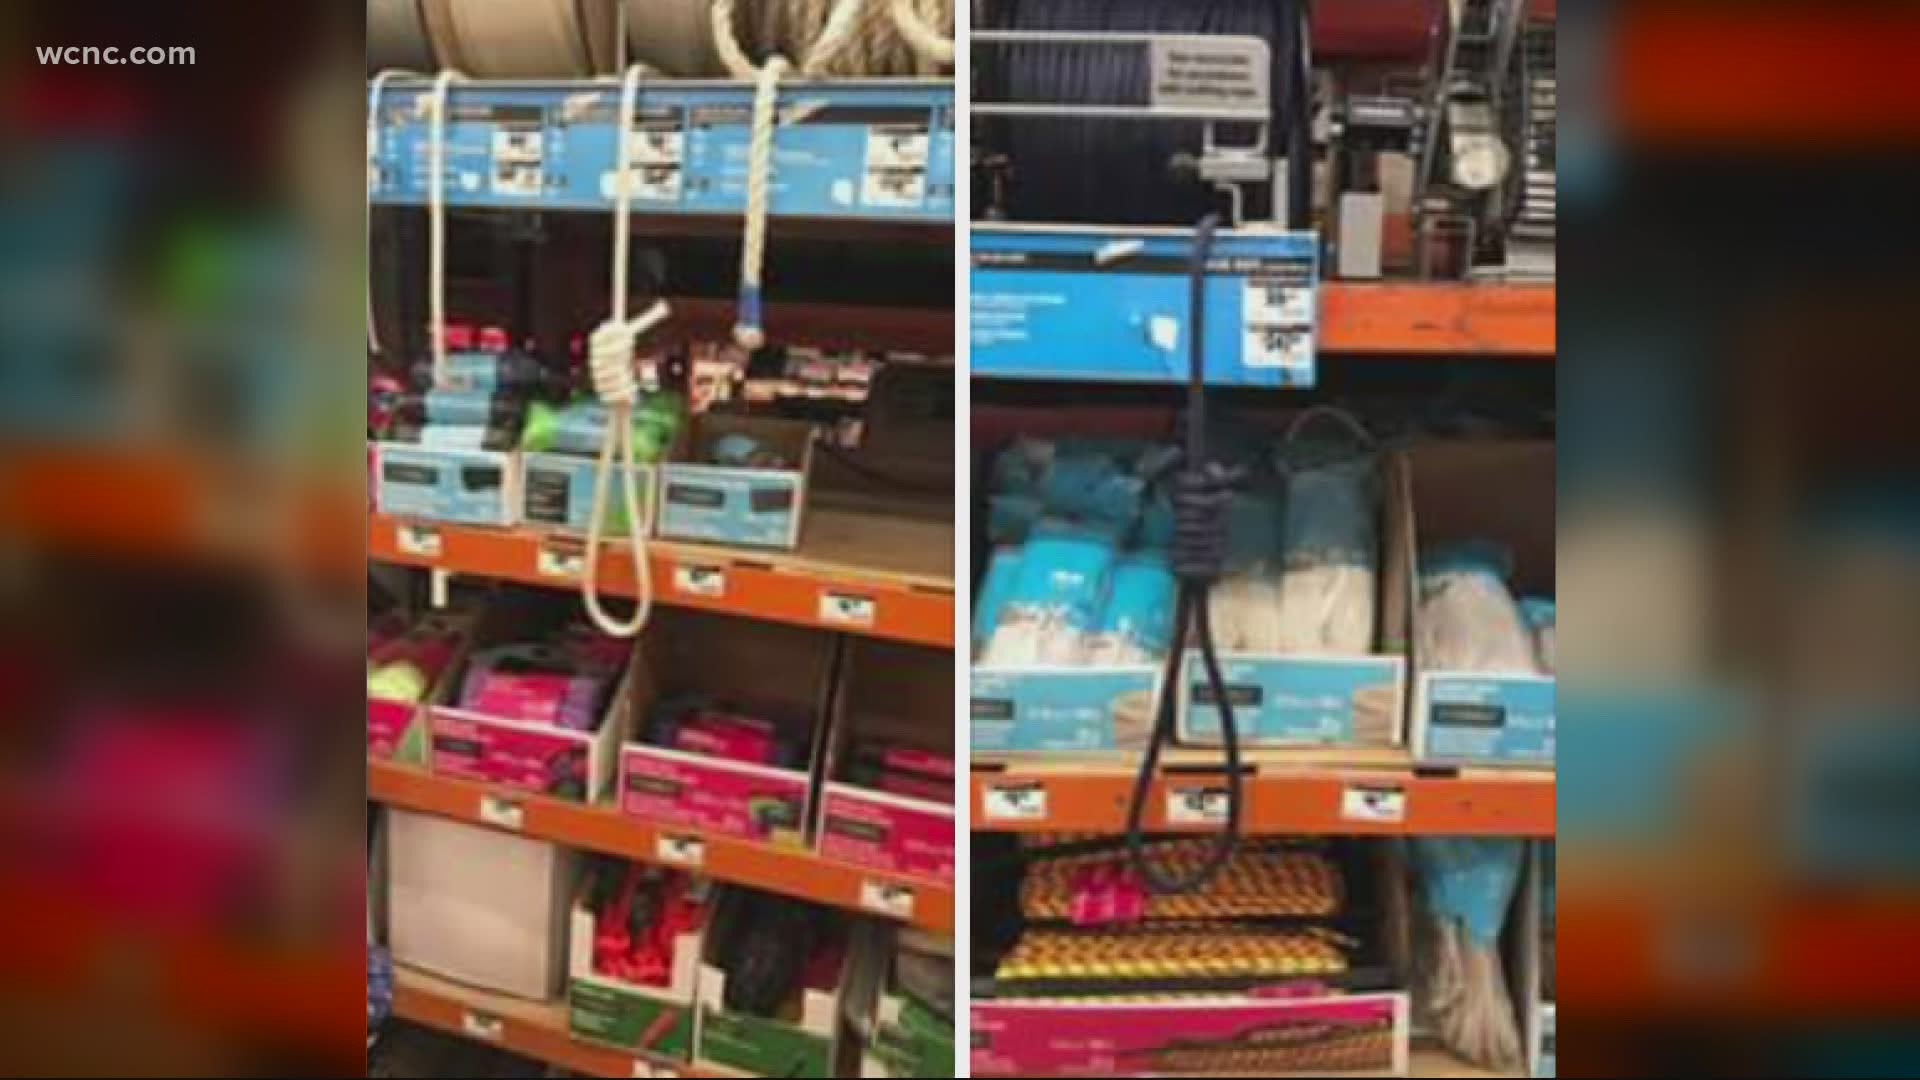 Home Depot modifies rope sales after noose found, reports say